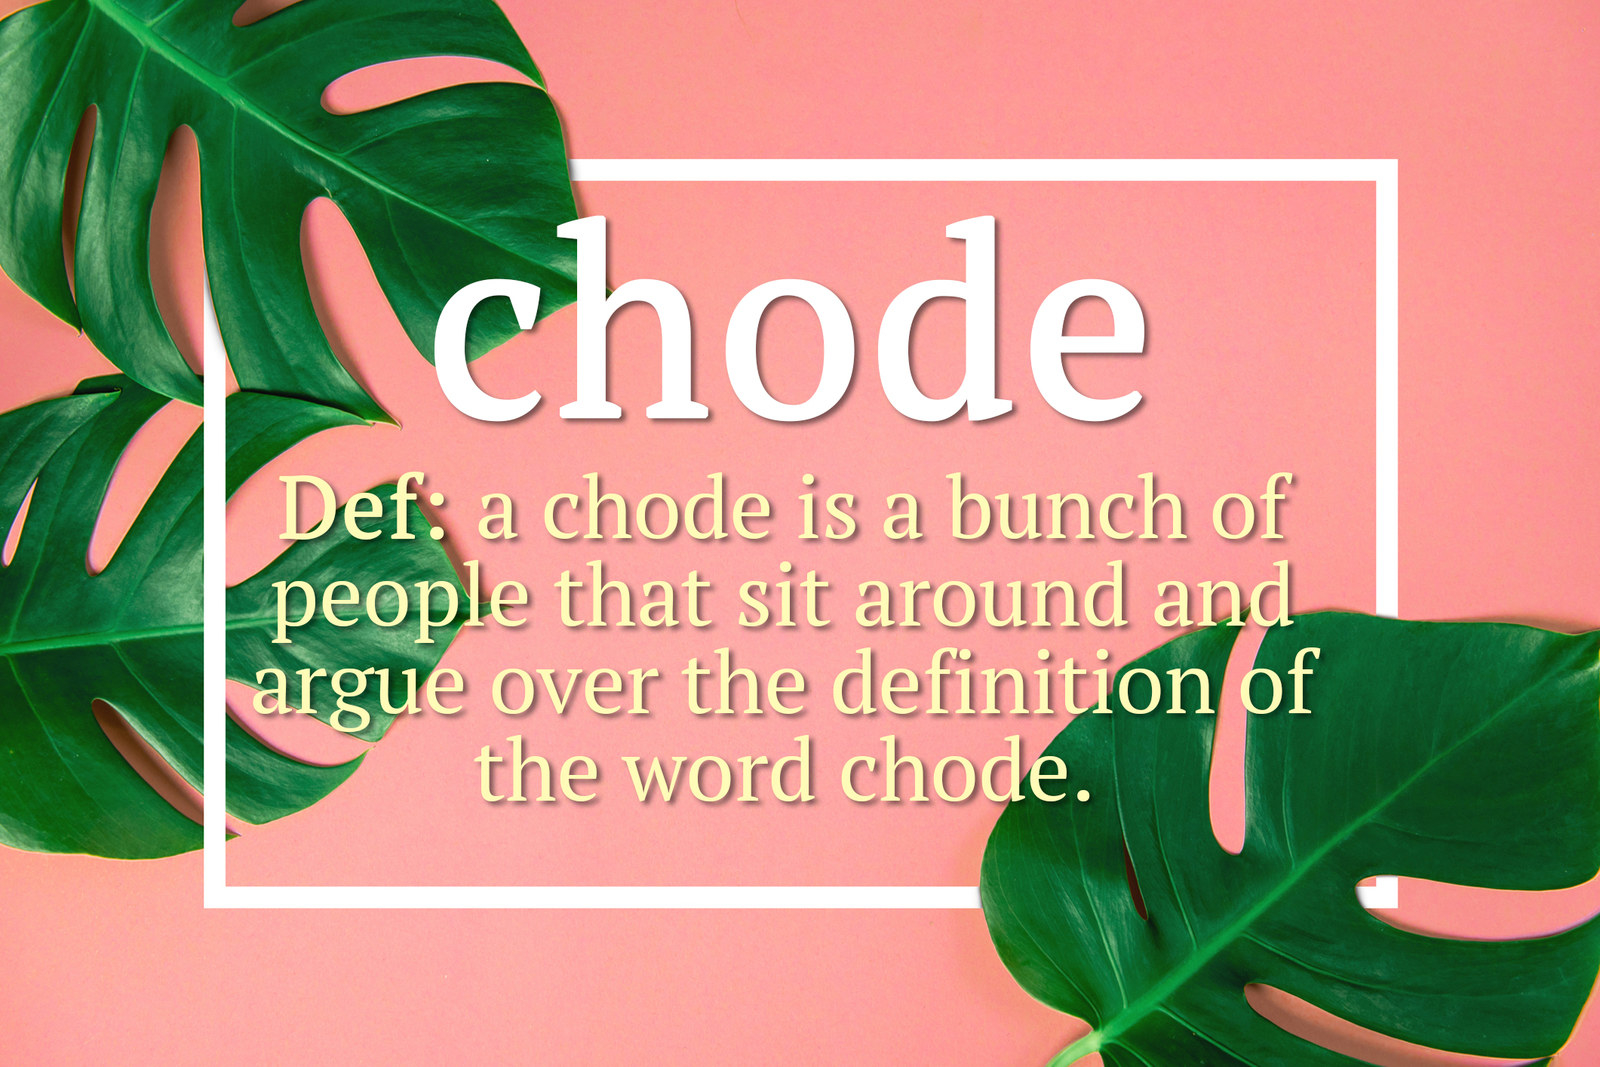 23 Funny Urban Dictionary Words You Need to Use Now